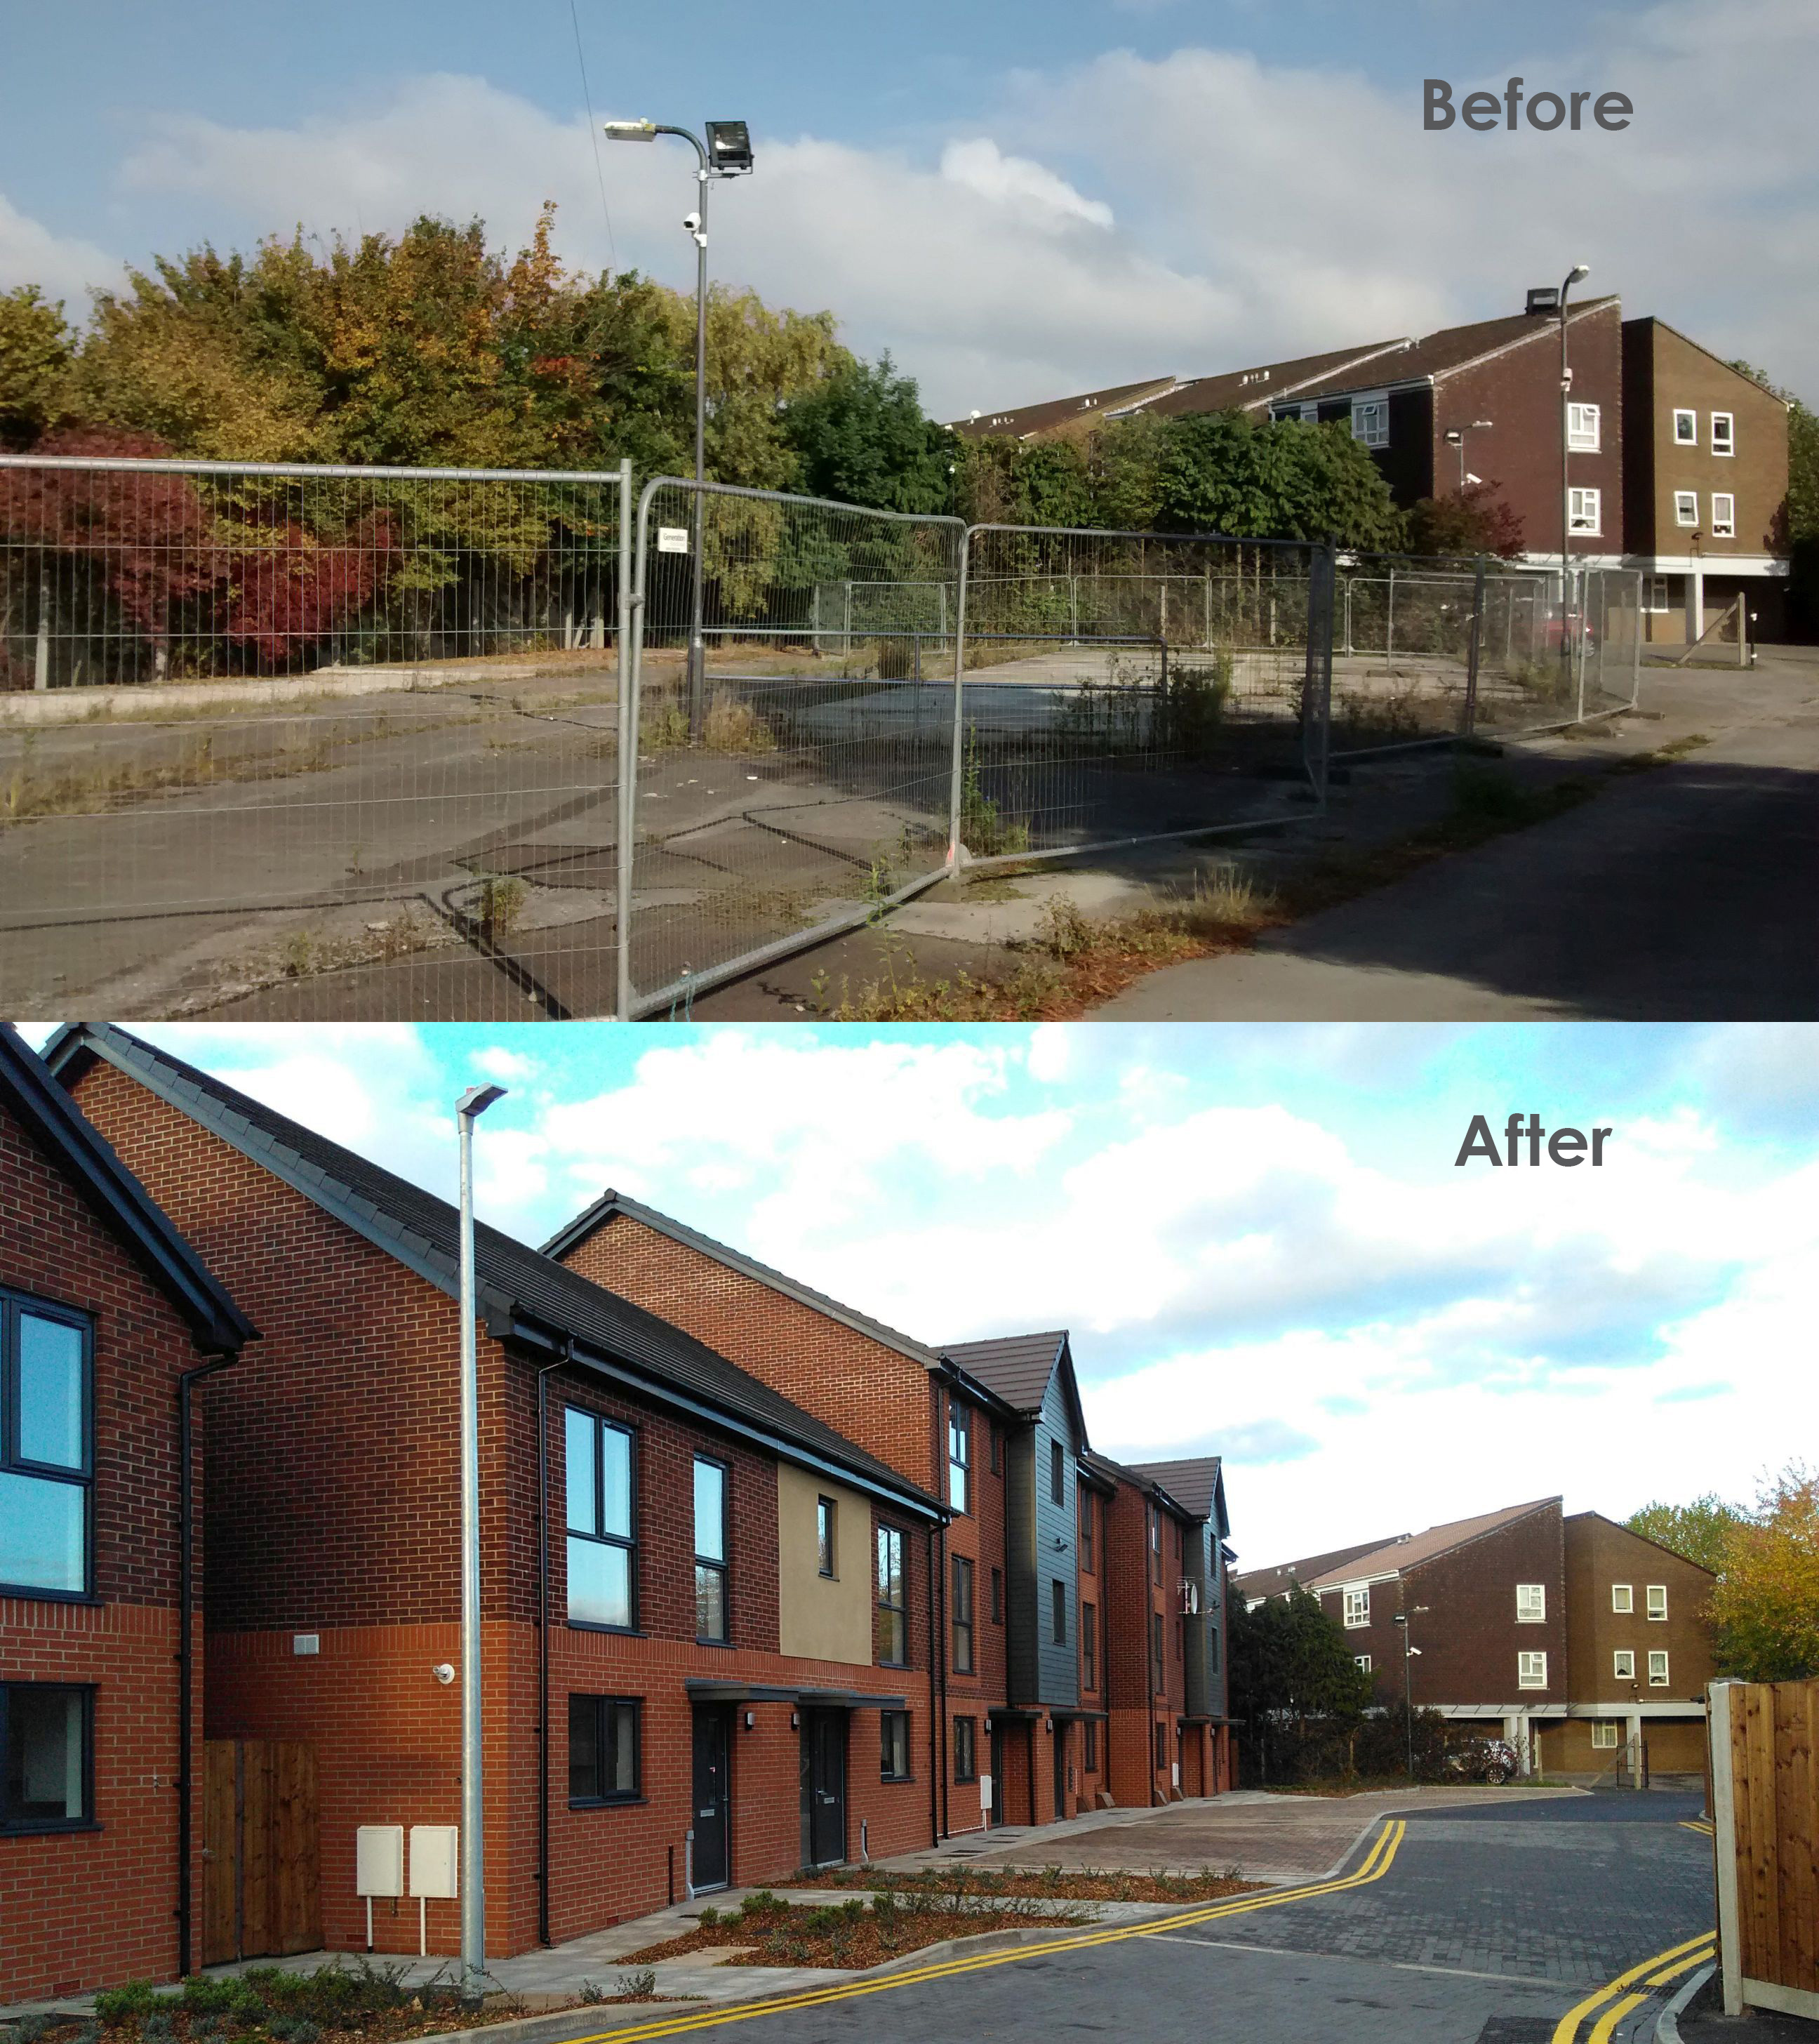 Before and after pictures of our new homes in Downend.